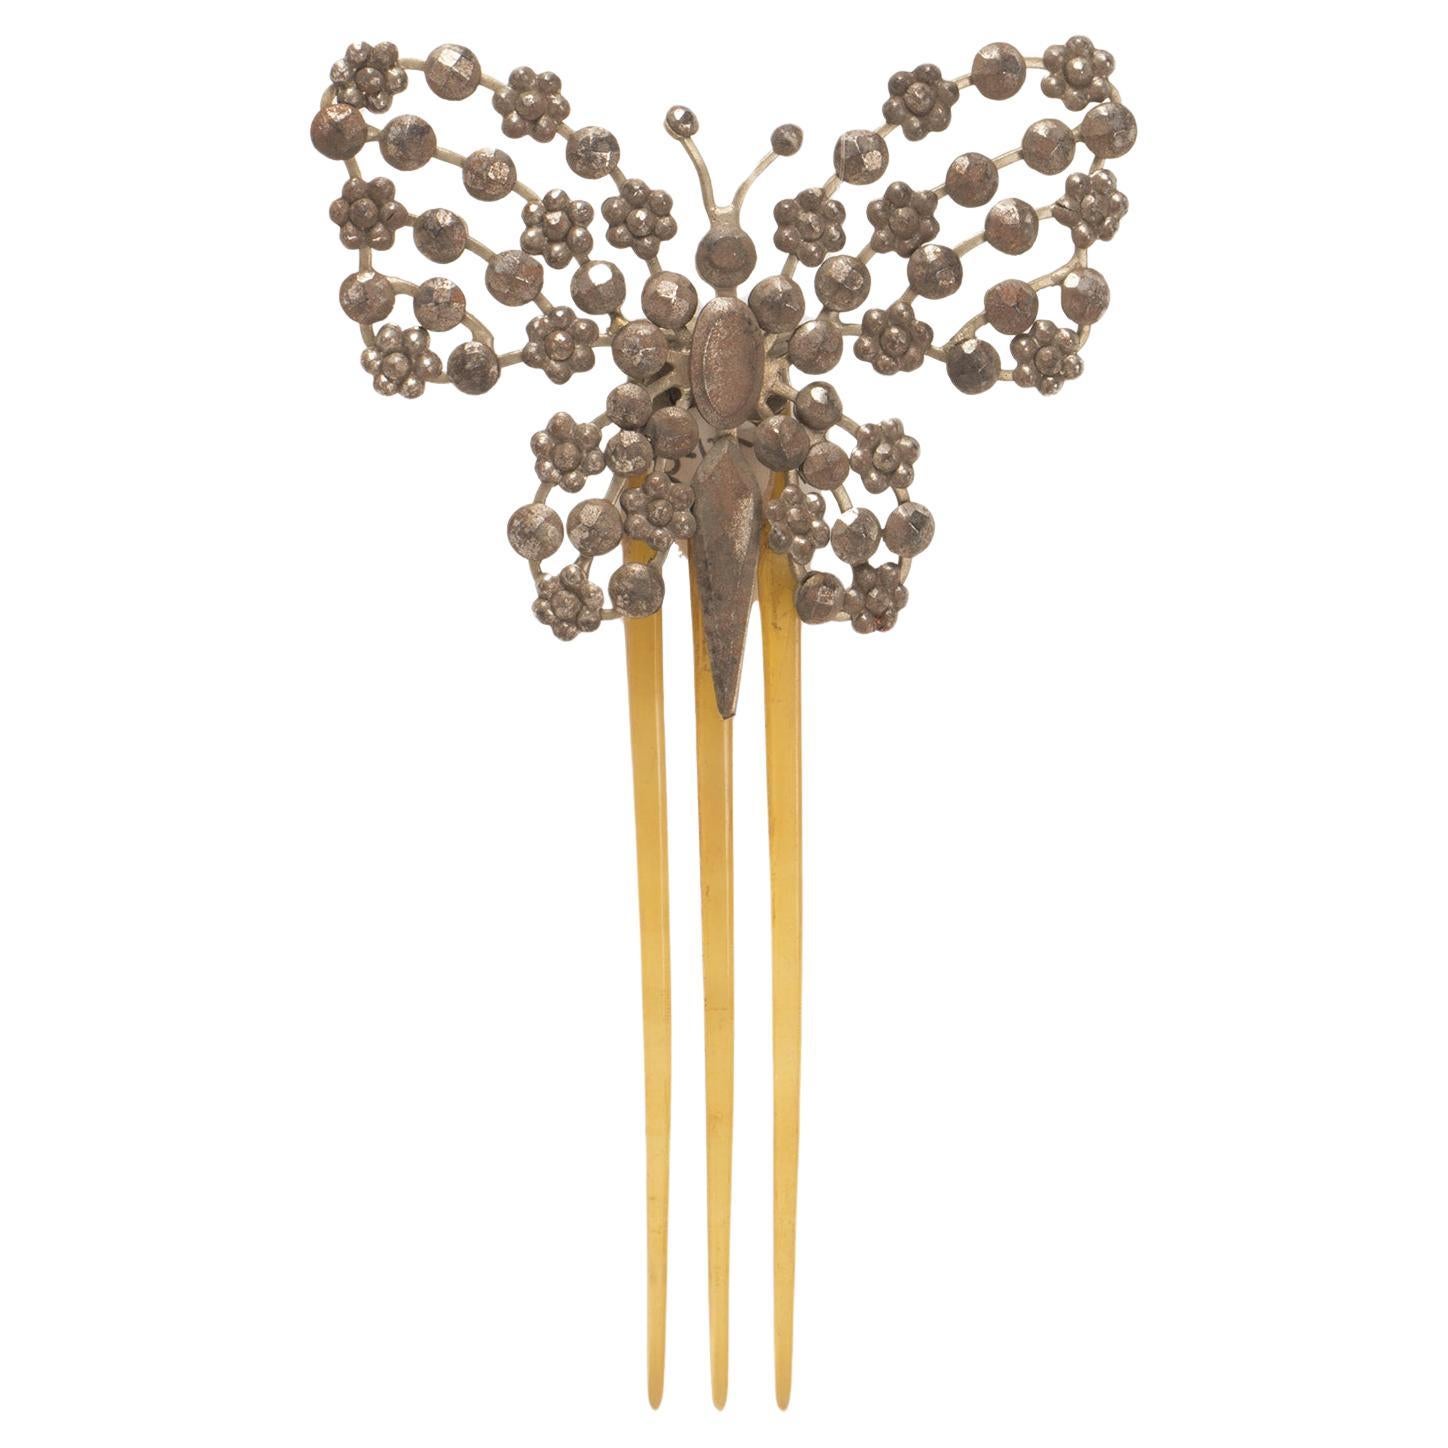 Turtleshell hair comb with butterfly in cutnsteel, France 1900.  For Sale